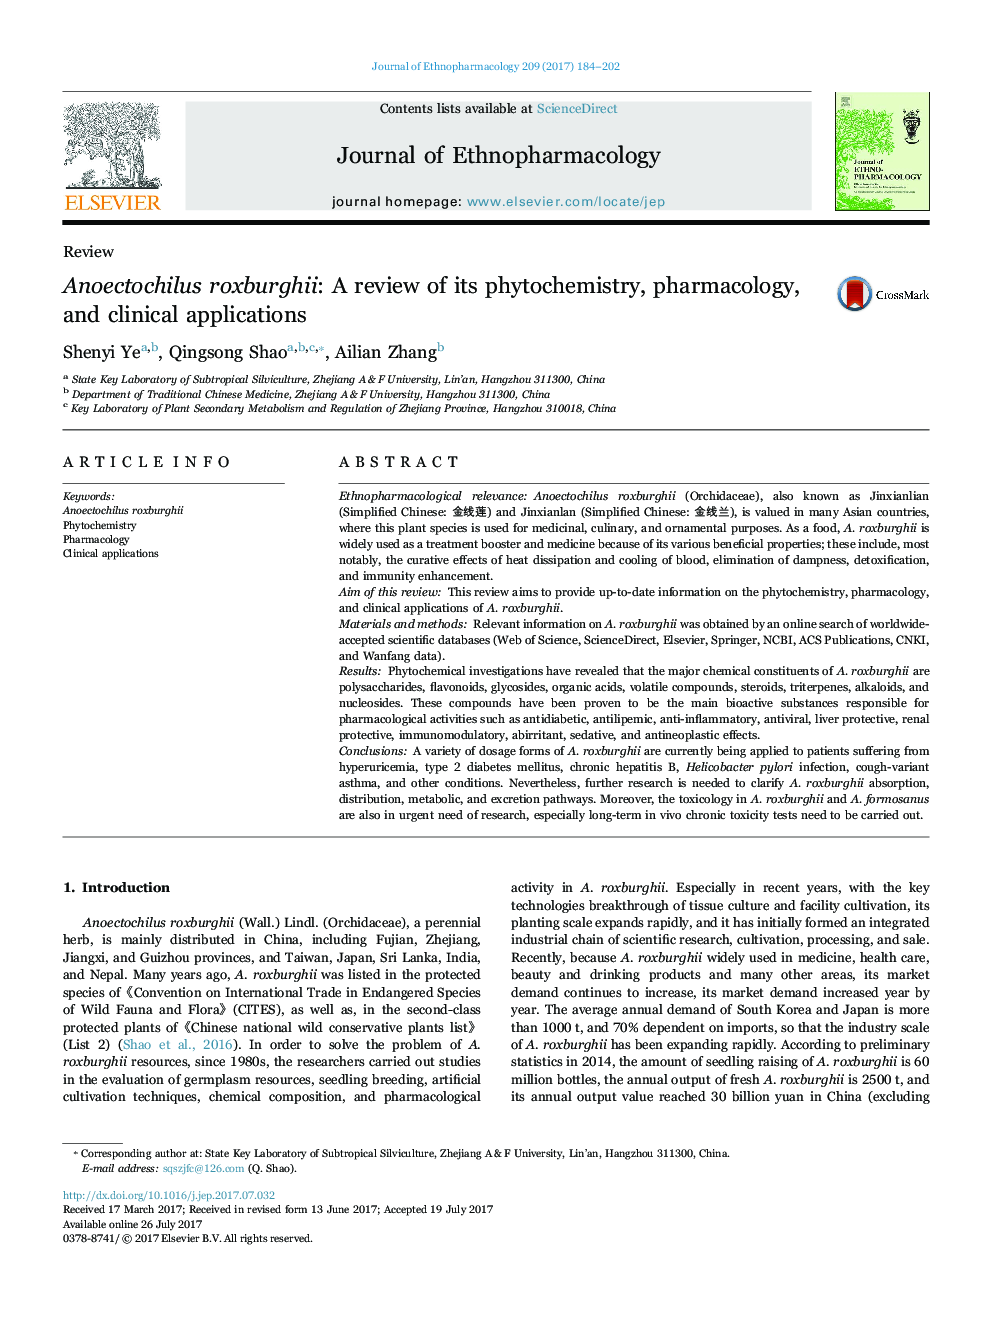 Anoectochilus roxburghii: A review of its phytochemistry, pharmacology, and clinical applications